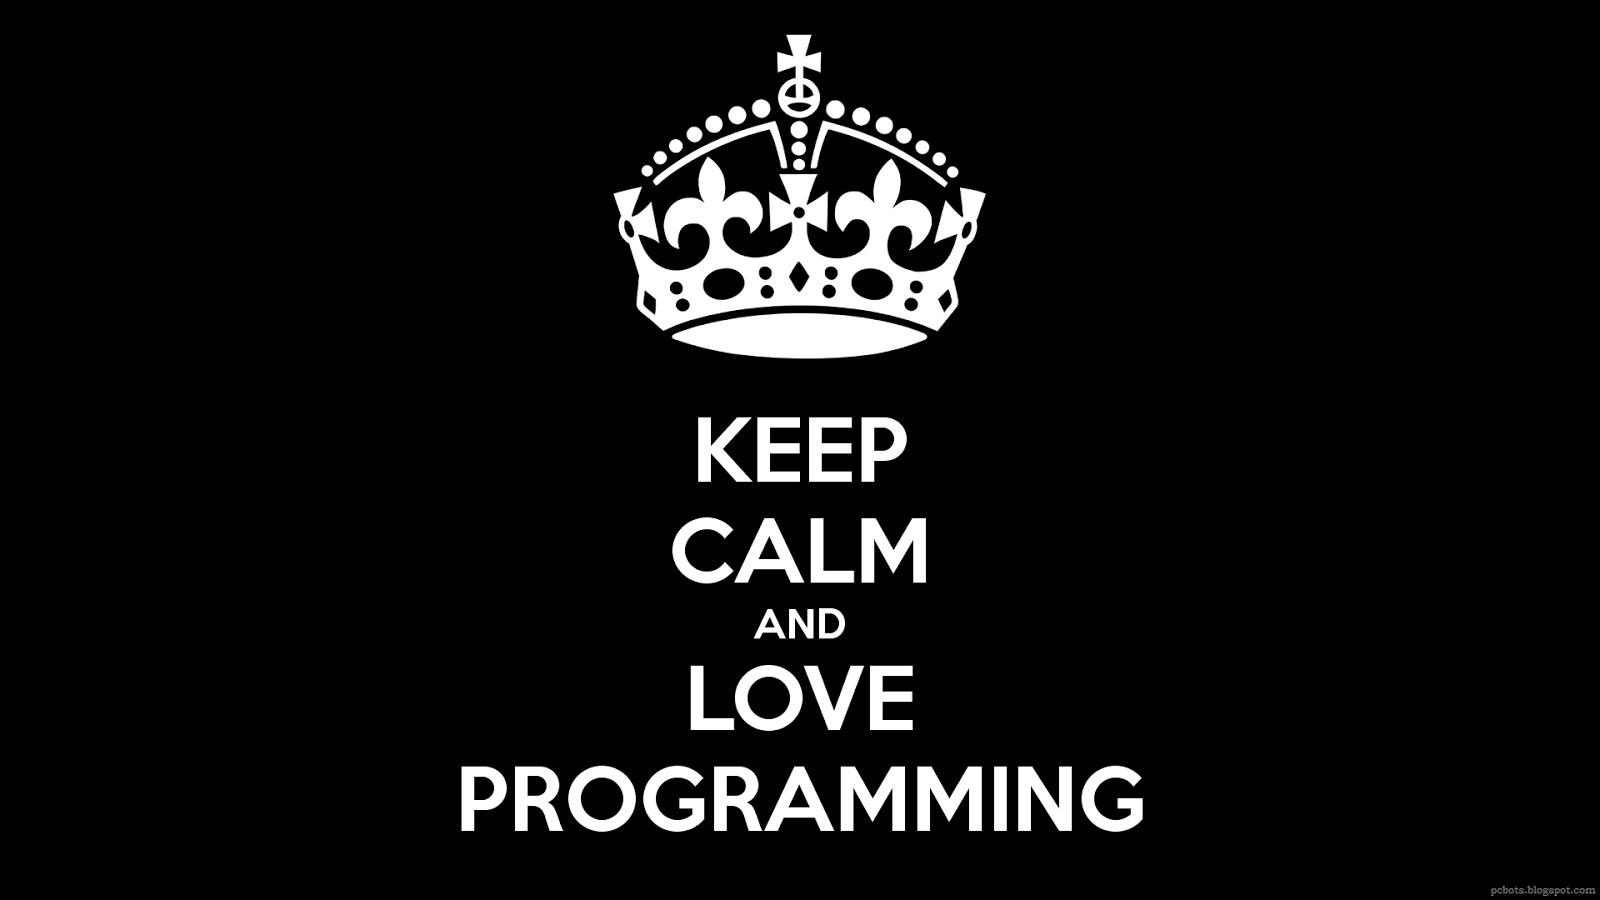 Coding Wallpaper, Keep Calm and Love Programming